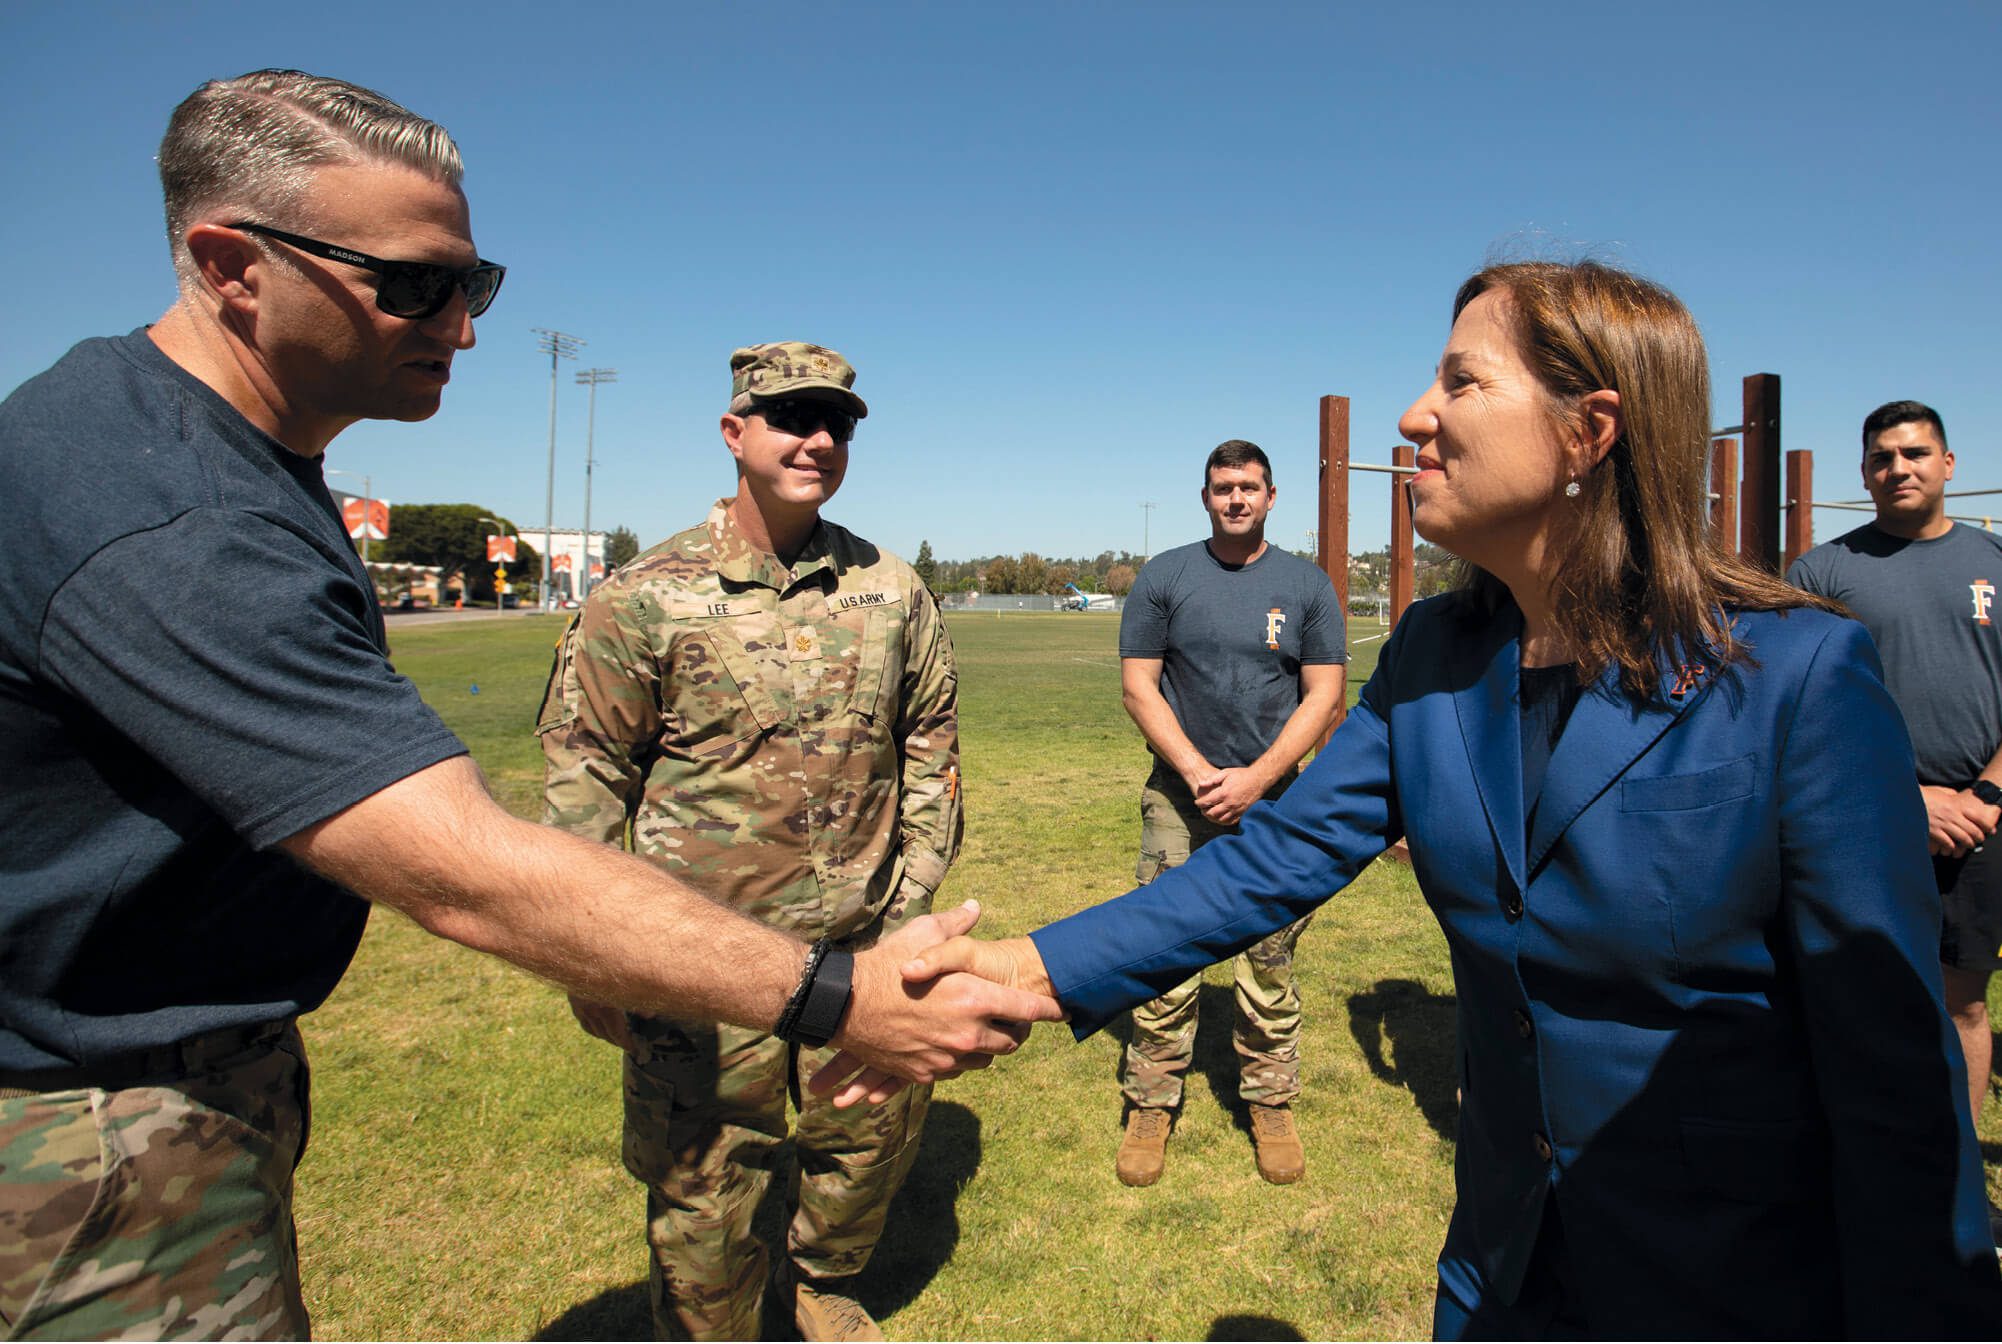 Woman shaking a veteran's hand while three other veterans look on.